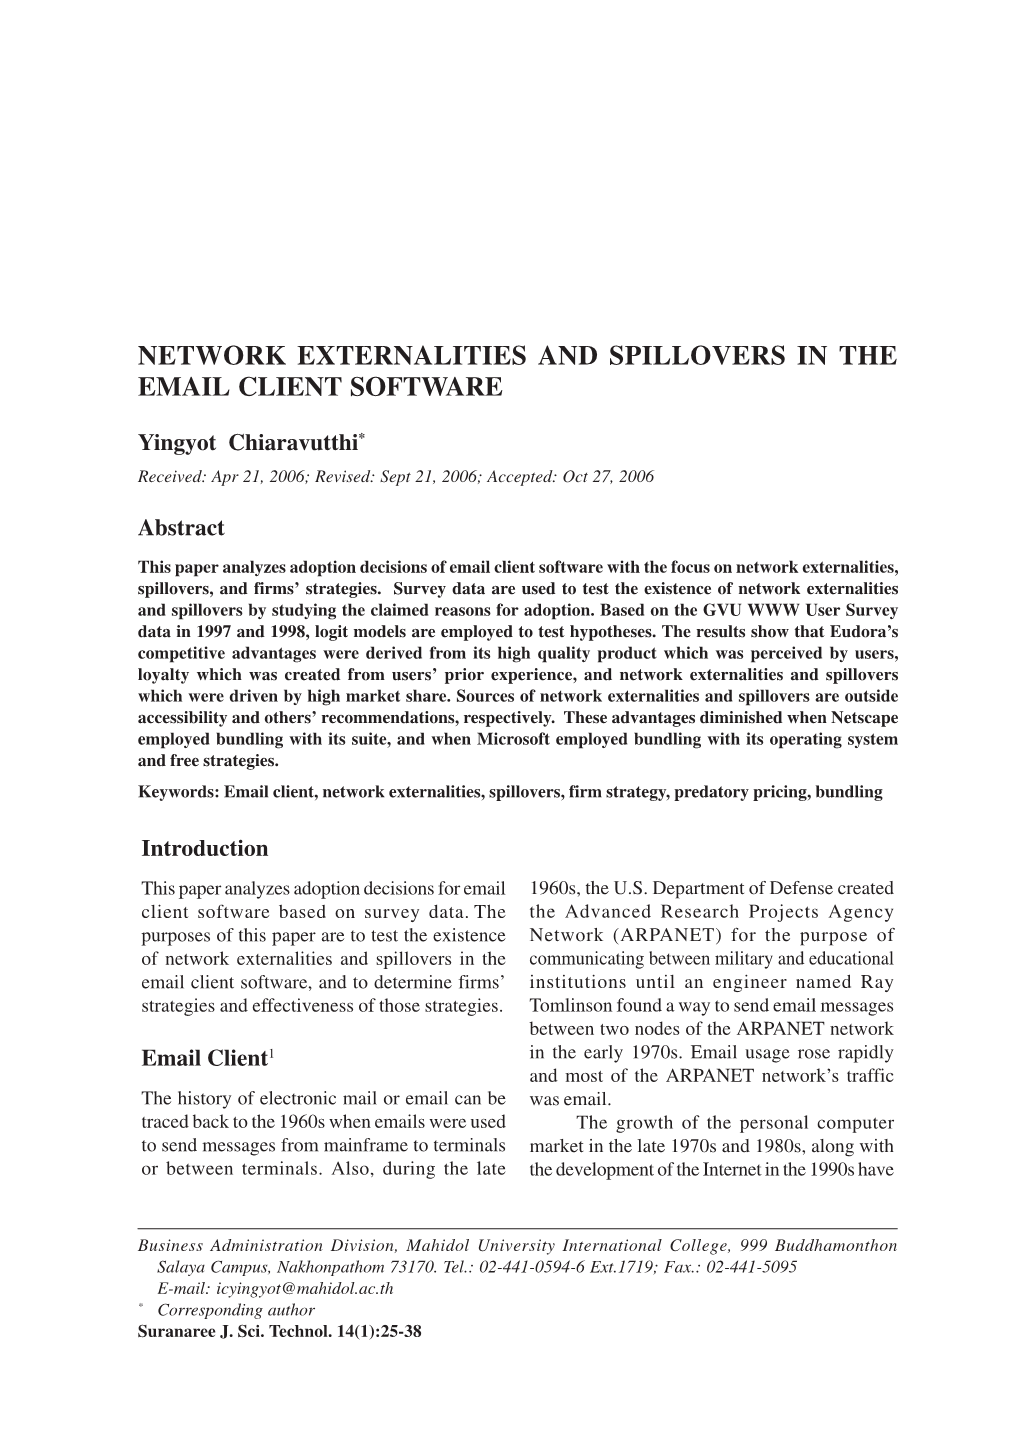 Network Externalities and Spillovers in the Email Client Software